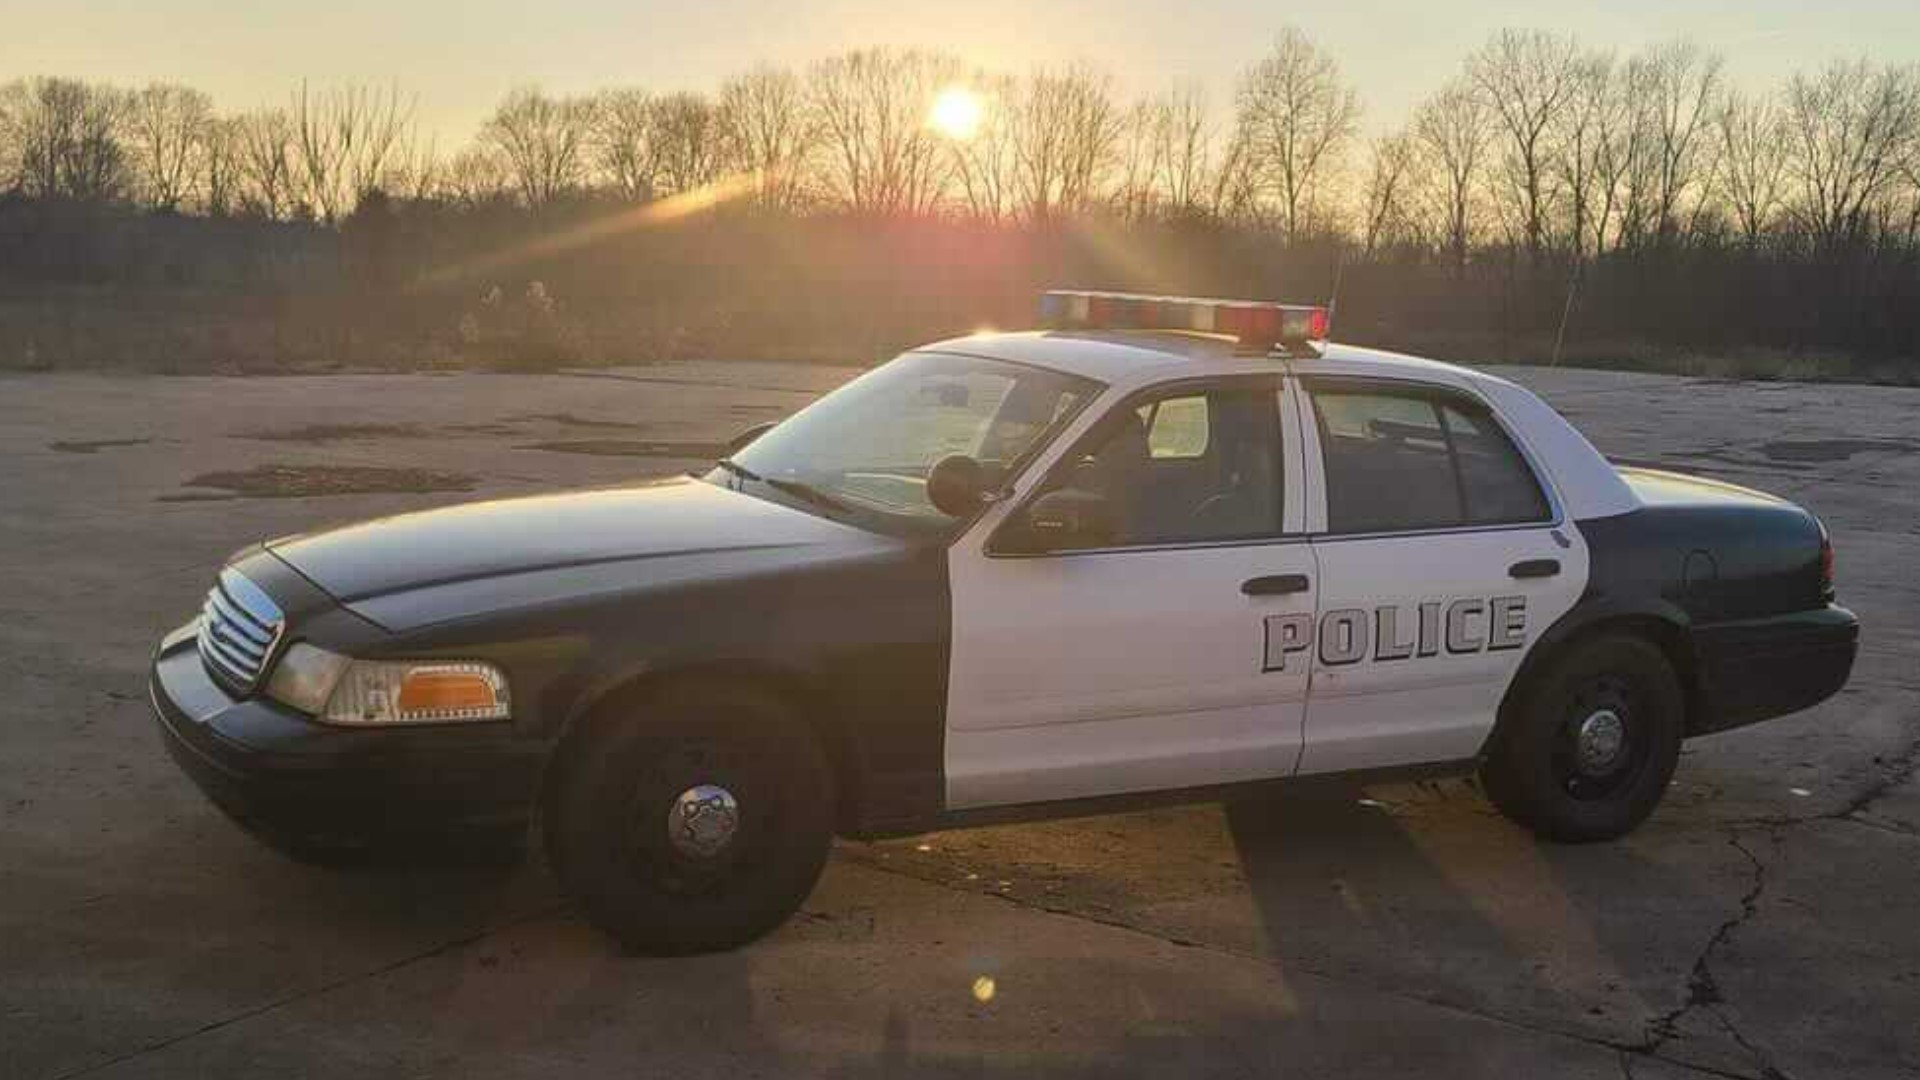 A small Indiana police department has turned to an online fundraiser to help buy a newer police car.